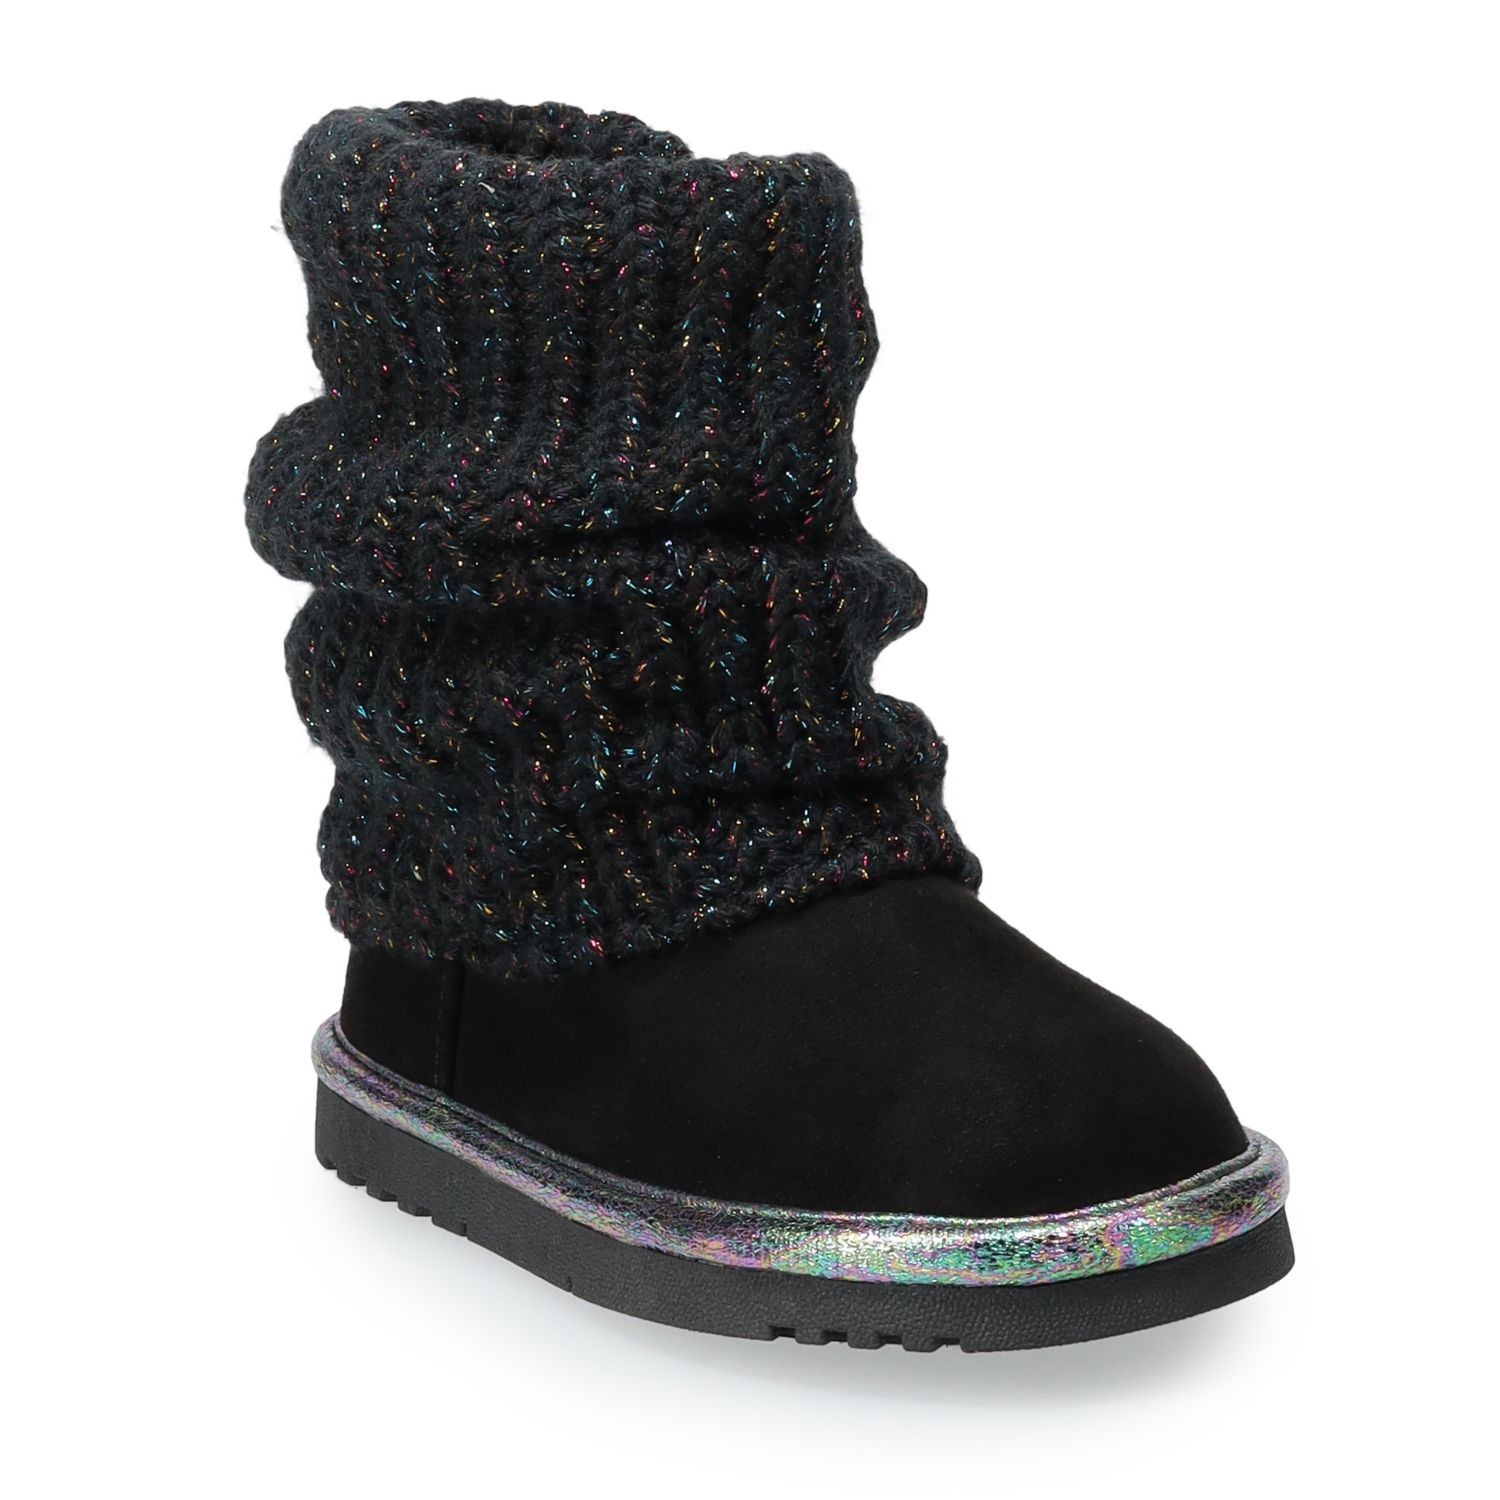 Kids Boots: Find Cute Footwear For Your 